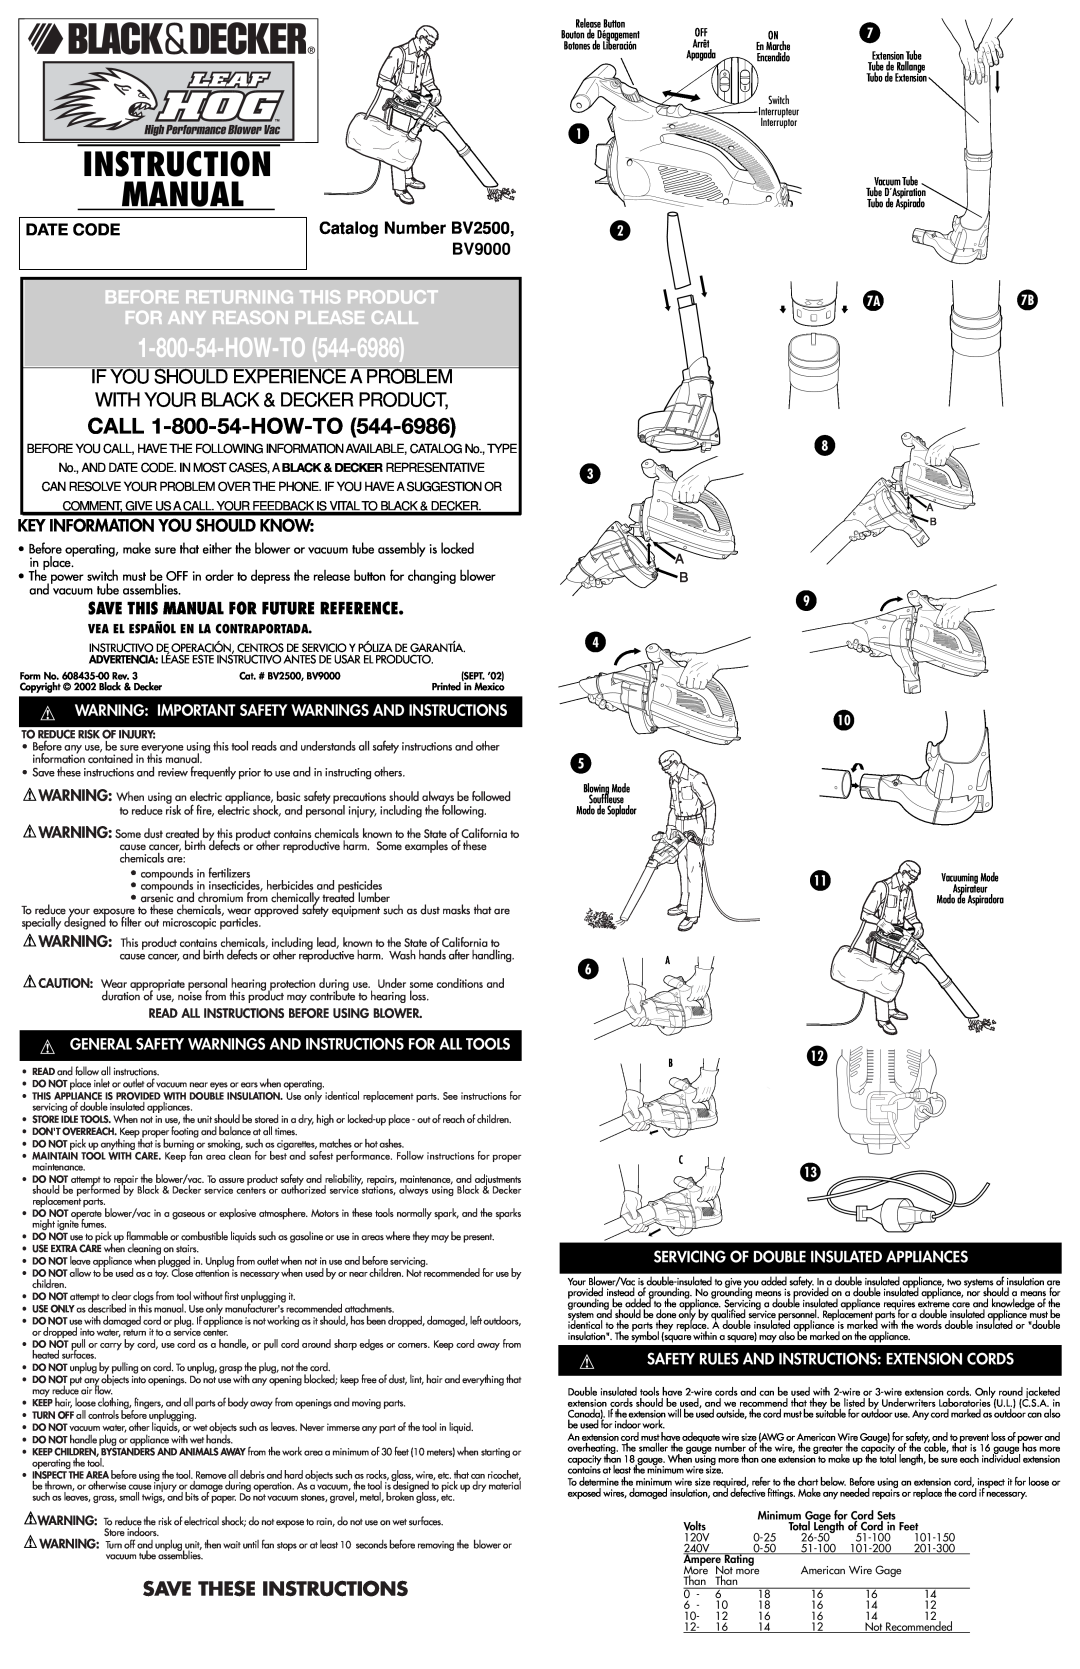 Black & Decker 608435-00 instruction manual Key Information You Should Know, Manual, Save These Instructions, BV9000 